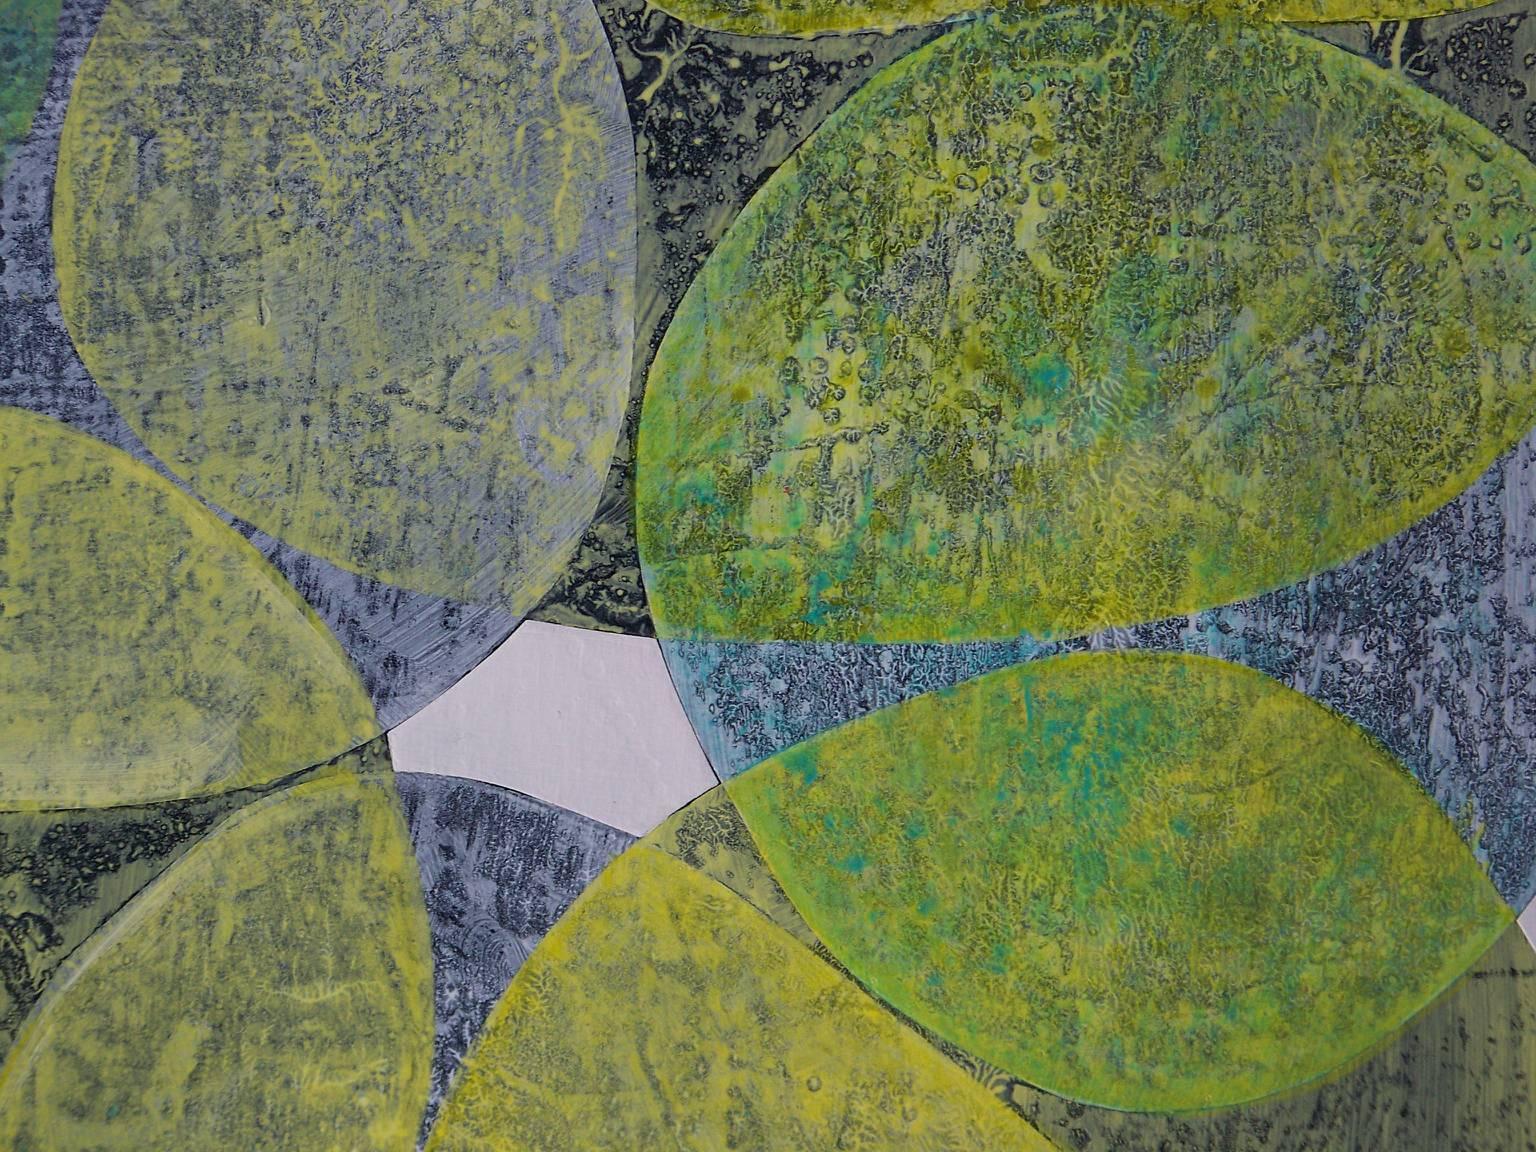 Inner Garden 25 - Abstract Geometric Painting by Denise Driscoll